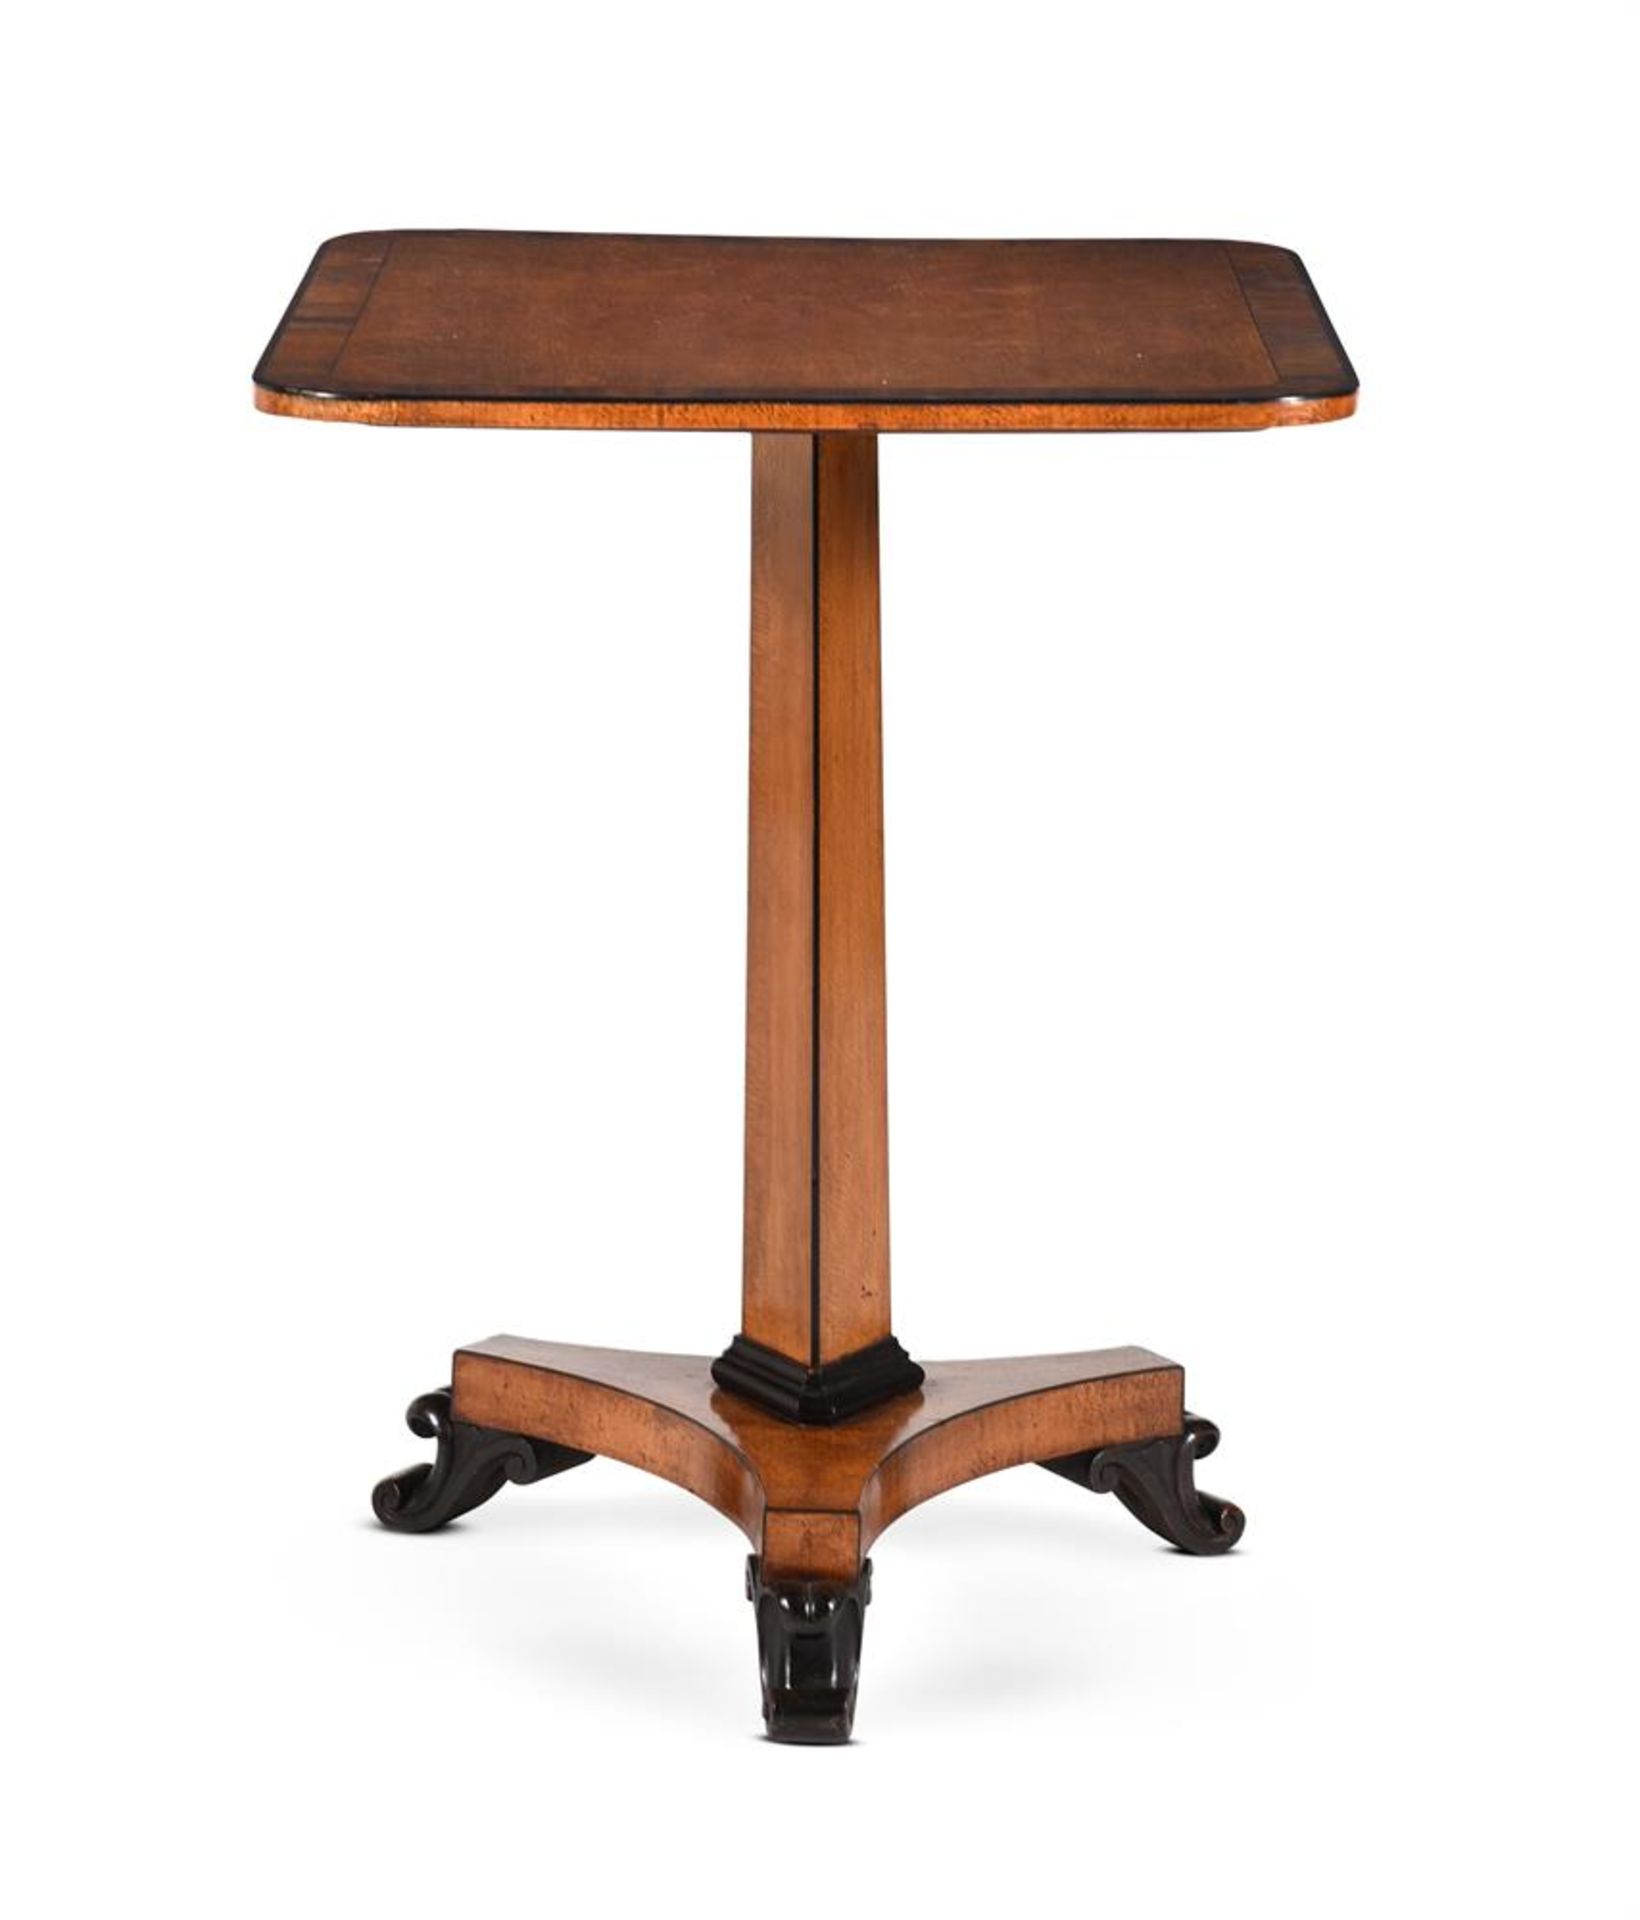 Y A GEORGE IV SYCAMORE, GONCALO ALVES BANDED AND EBONISED PEDESTAL TABLE, CIRCA 1825